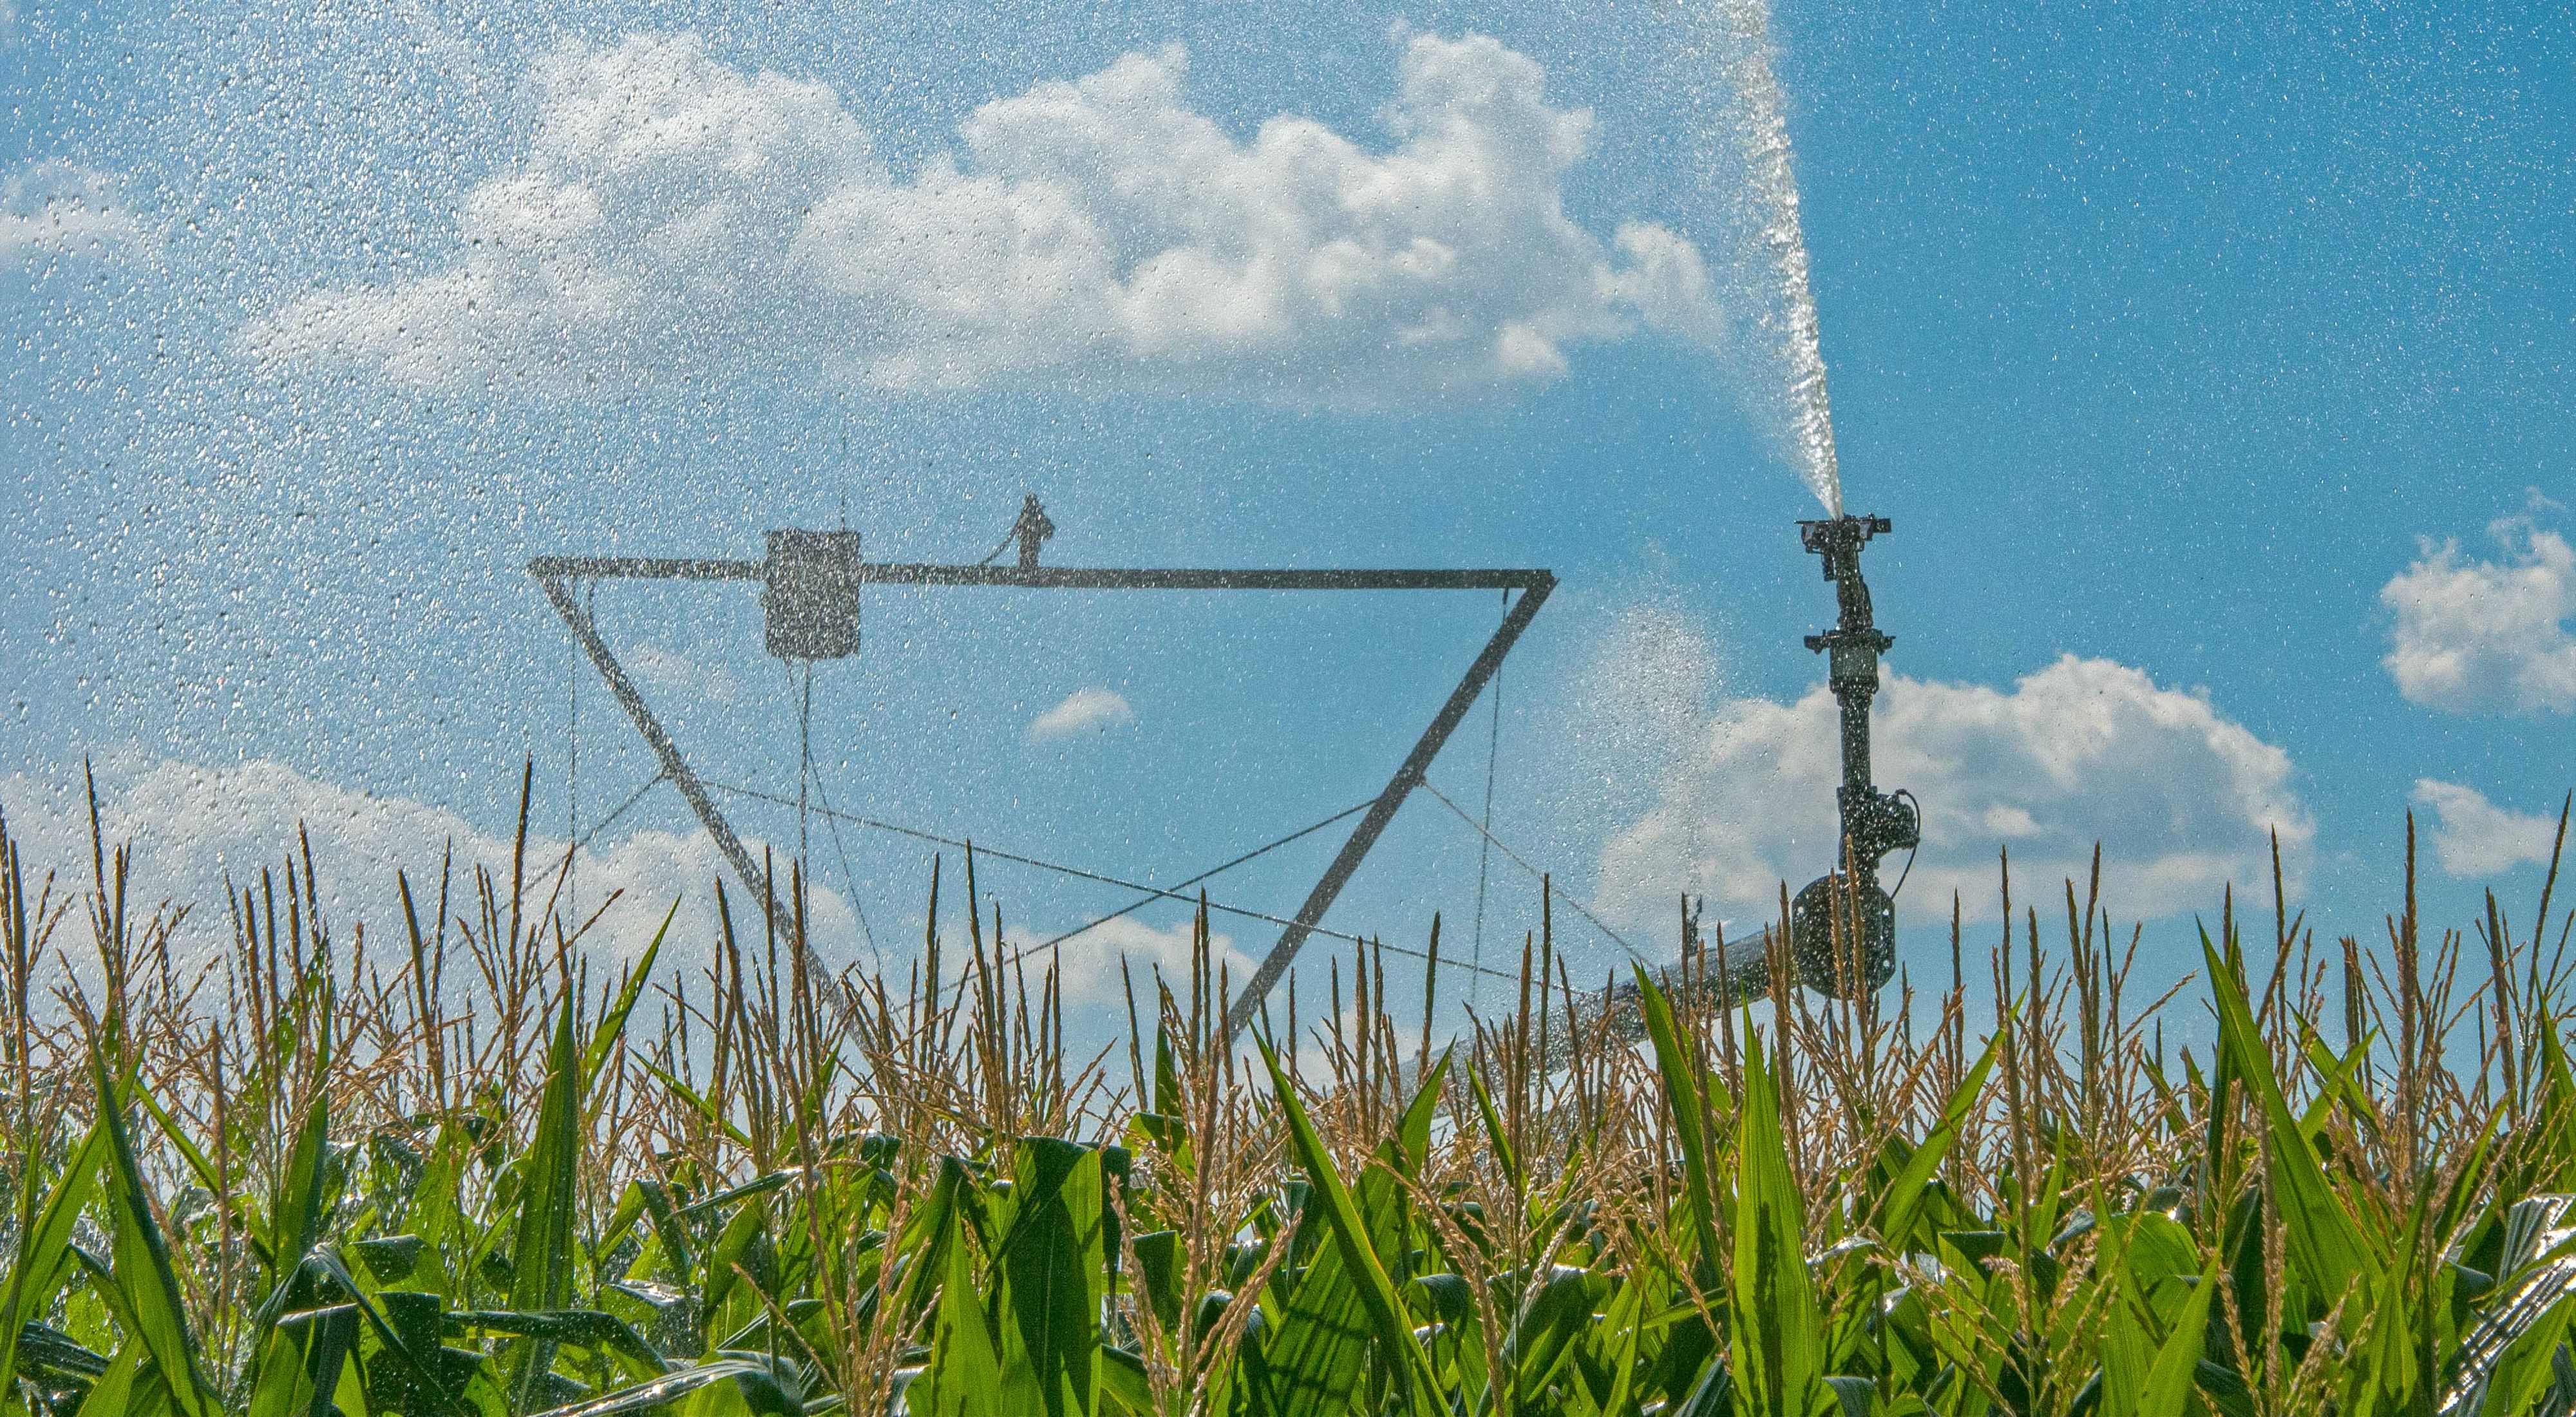 A large pivot spraying water on row crops of corn.